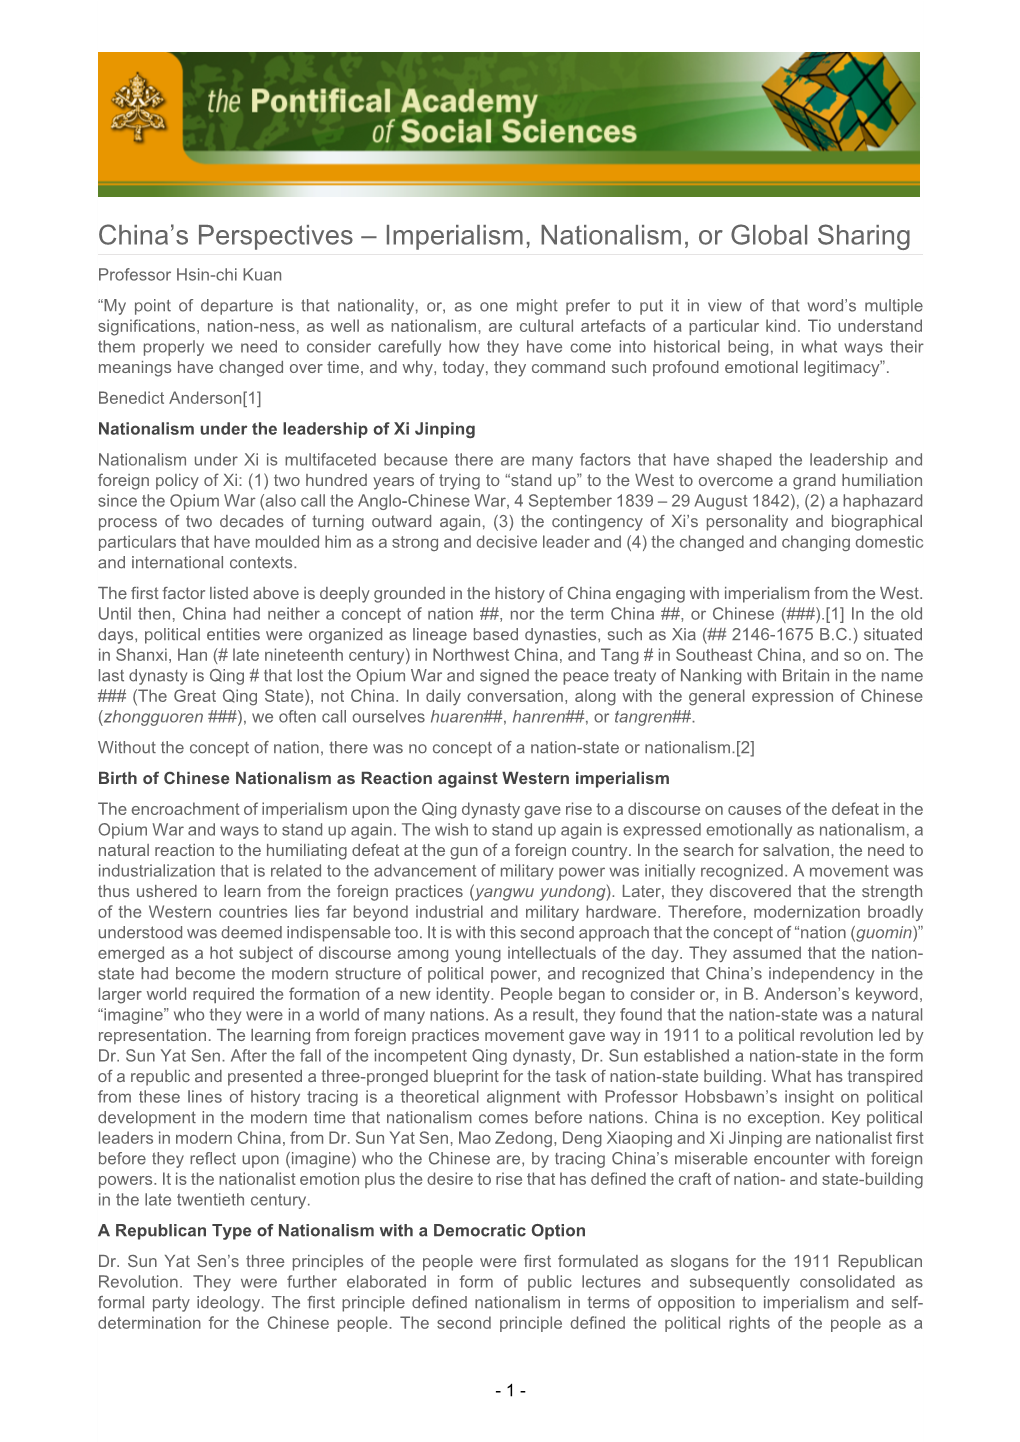 China's Perspectives – Imperialism, Nationalism, Or Global Sharing